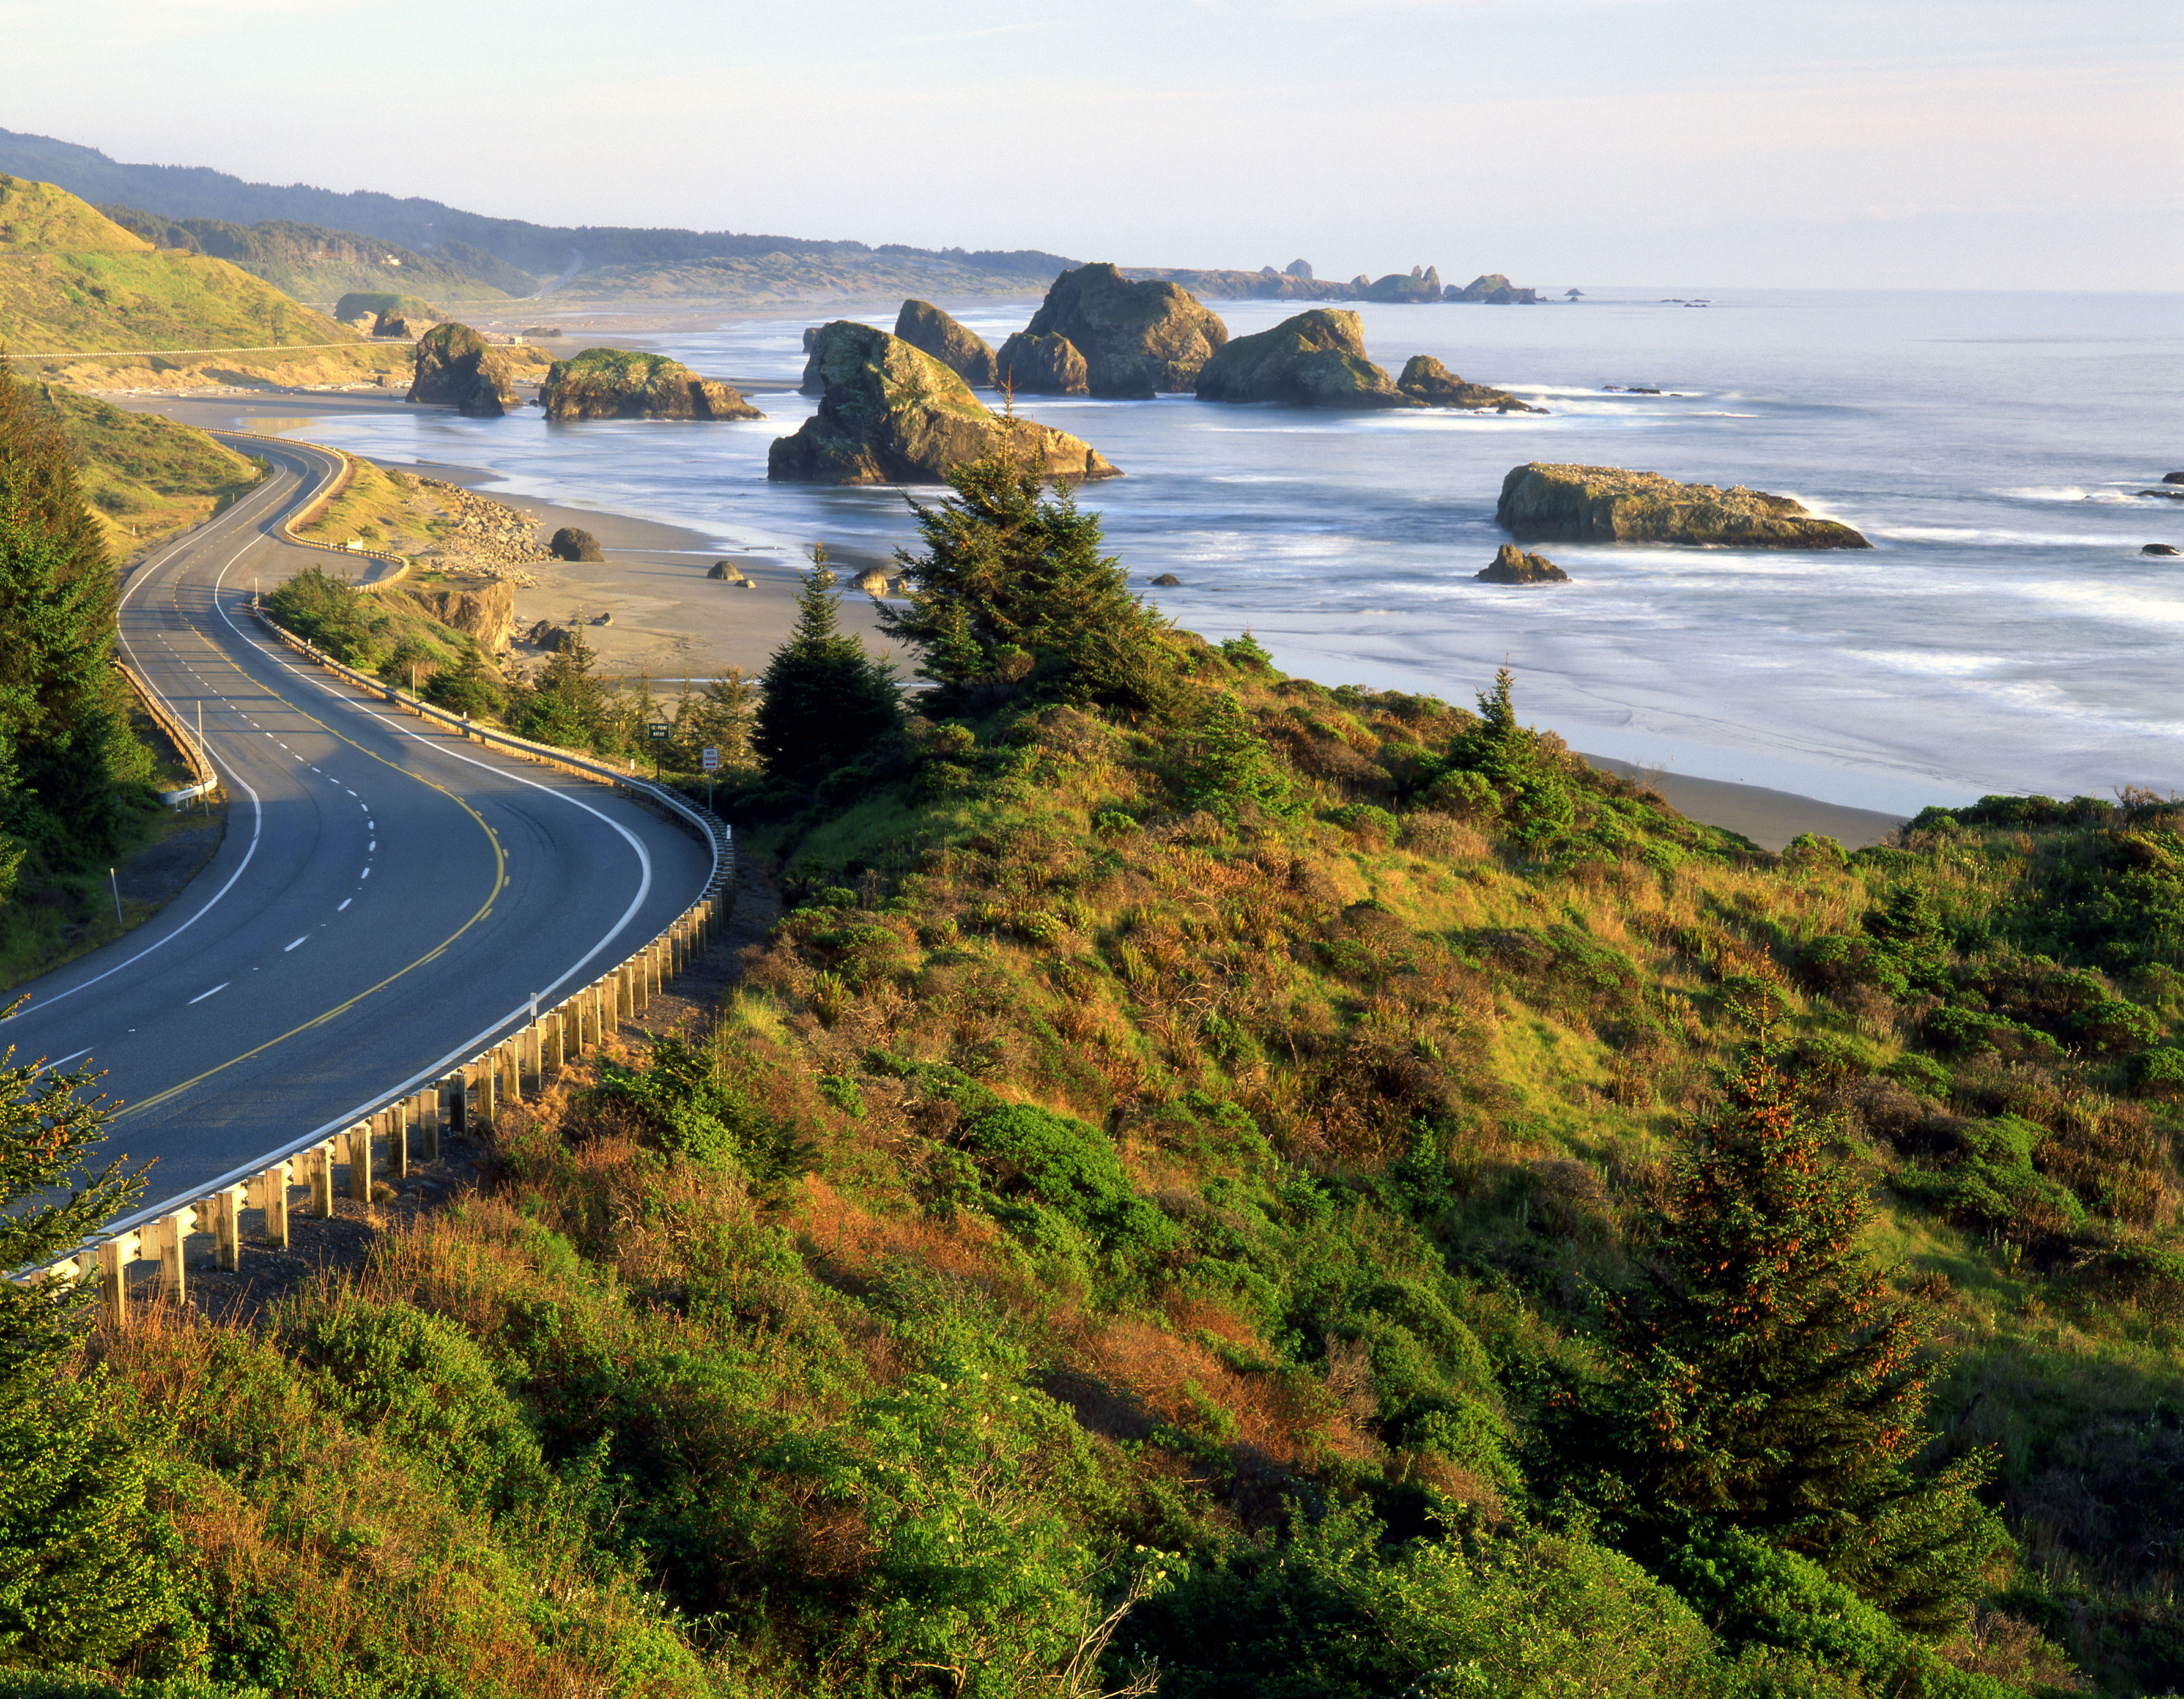 <p>California’s PCH might be better known, but <a href="https://www.cntraveler.com/galleries/2016-05-02/the-us-road-trip-thats-as-beautiful-as-highway-1?mbid=synd_msn_rss&utm_source=msn&utm_medium=syndication">Oregon’s Highway 101</a> is just as jaw-dropping to drive, snaking down the shoreline from Washington State to the redwood forests and further south. Along the seven-hour route, there are superb beaches—Cannon Beach is particularly pause-worthy—as well as countless, often near-deserted state parks. The waters here are prime surfing terrain while the small towns along the coast, like Seaside and Newport, have more than a whiff of New England charm, not to mention equally impressive chowder.</p> <p><strong>Where to stop:</strong> Hike through the myrtle and redwood groves of <a href="https://stateparks.oregon.gov/index.cfm?do=parkPage.dsp_parkPage&parkId=51">Alfred A. Loeb State Park</a> or the <a href="https://www.fs.usda.gov/recarea/rogue-siskiyou/recreation/recarea/?recid=69554">Myrtle Tree Trail</a>, a quarter-mile walk through the fragrant tree cluster to the world’s largest known eucalyptus tree, with a canopy that’s almost 70 feet across.</p> <p><strong>Where to eat:</strong> Anywhere that serves Pacific clam chowder, which often amps up the flavor of the more delicate, buttery clams round here with chunks of smoked bacon. Compare the recipe at <a href="https://www.seasidebrewery.com/">Seaside Brewery</a> with the lighter, bacon-free version at <a href="https://normasoceandiner.com/menu.htm">Norma’s Ocean Diner</a> nearby.</p> <p><strong>Where to stay:</strong> The six rooms at the <a href="https://www.hecetalighthouse.com/">Heceta Lighthouse</a> offer a unique coastal hideout. The lighthouse was built in the early 1890s and the cottage was recently converted to an upscale B&B—book the Lightkeeper’s Room for the best view of the lighthouse itself.</p><p>Sign up to receive the latest news, expert tips, and inspiration on all things travel</p><a href="https://www.cntraveler.com/newsletter/the-daily?sourceCode=msnsend">Inspire Me</a>